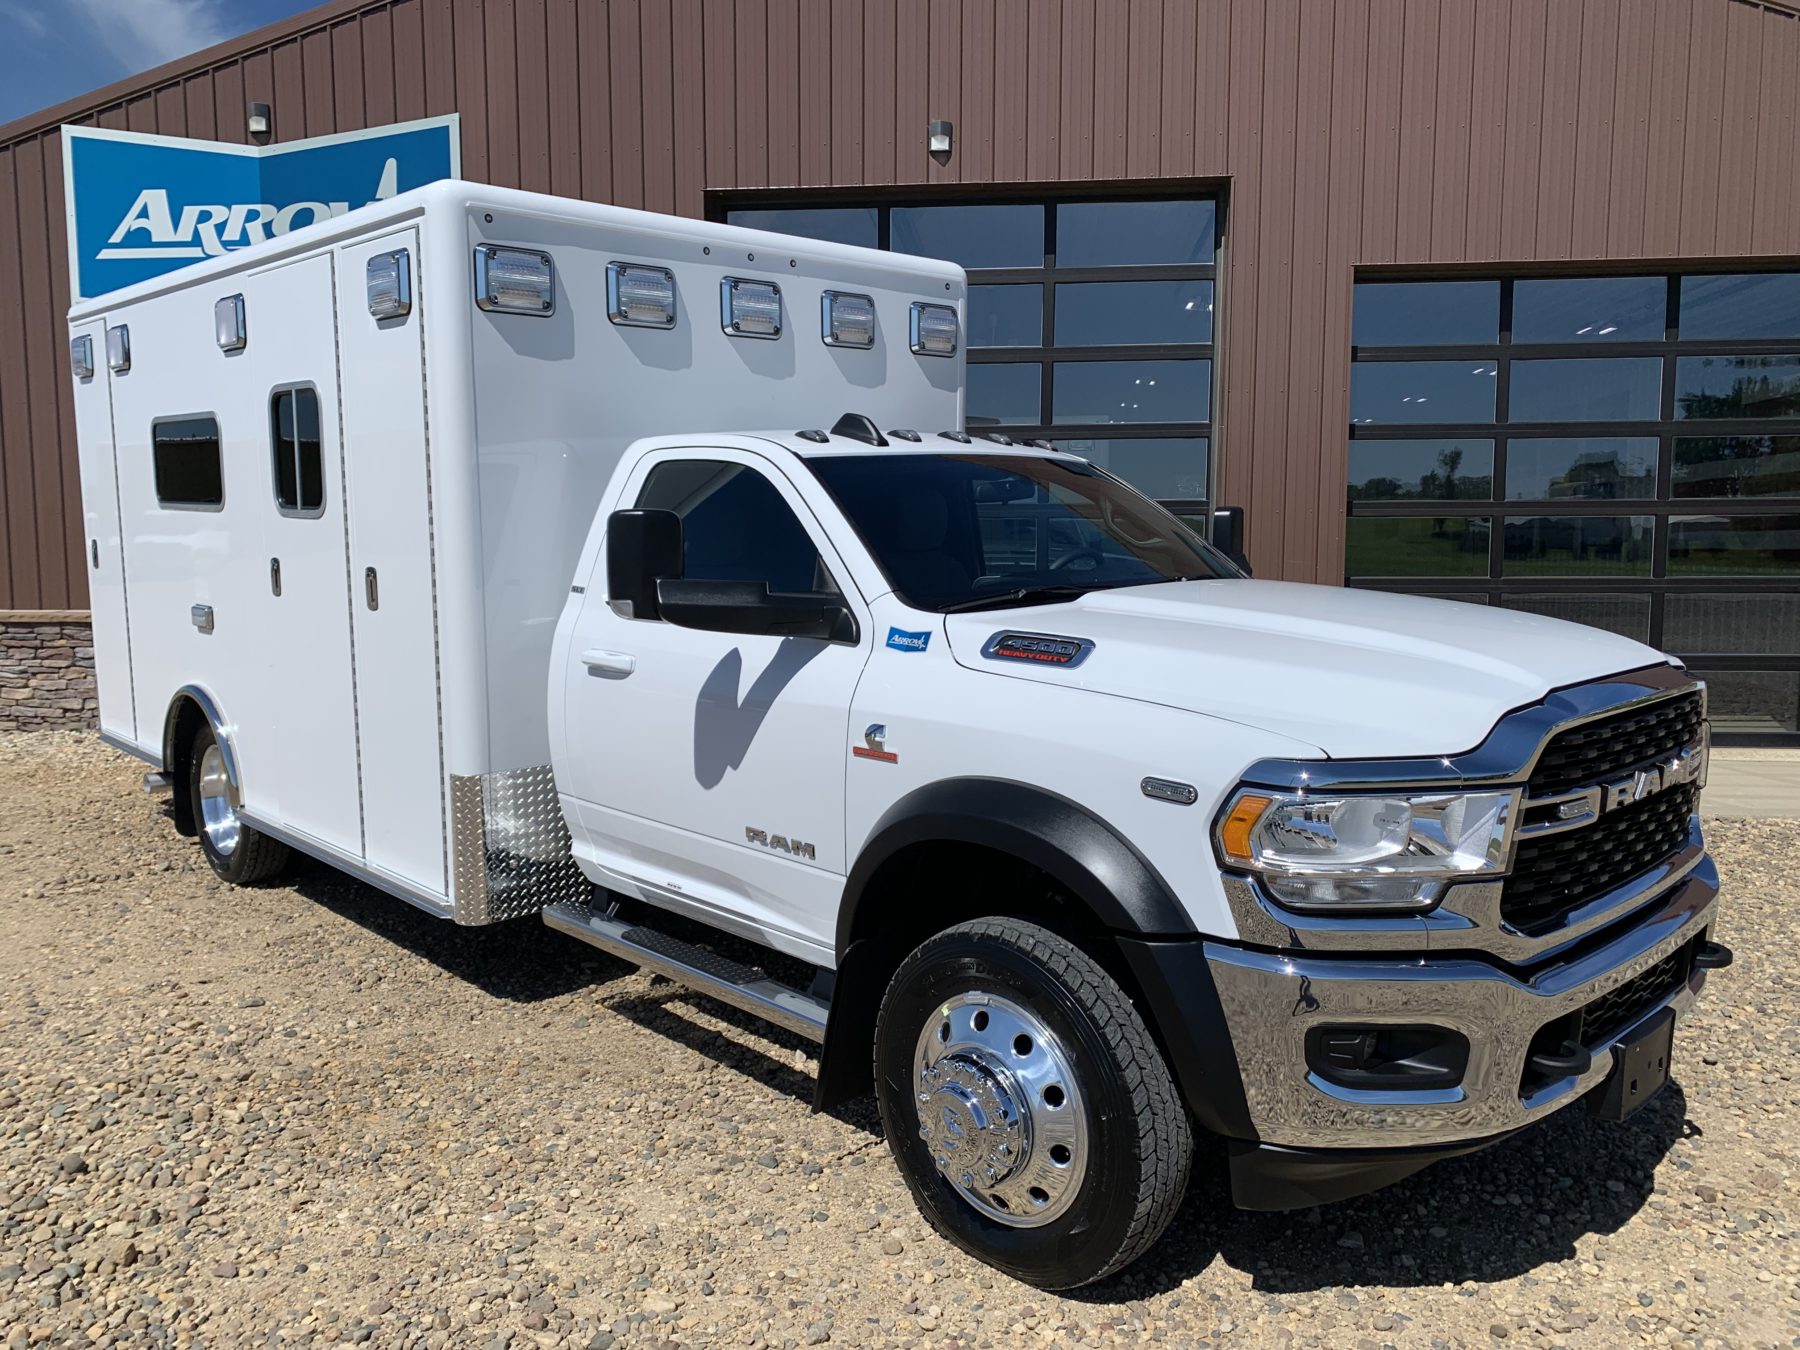 2022 Ram 4500 4x4 Heavy Duty Ambulance For Sale – Picture 4